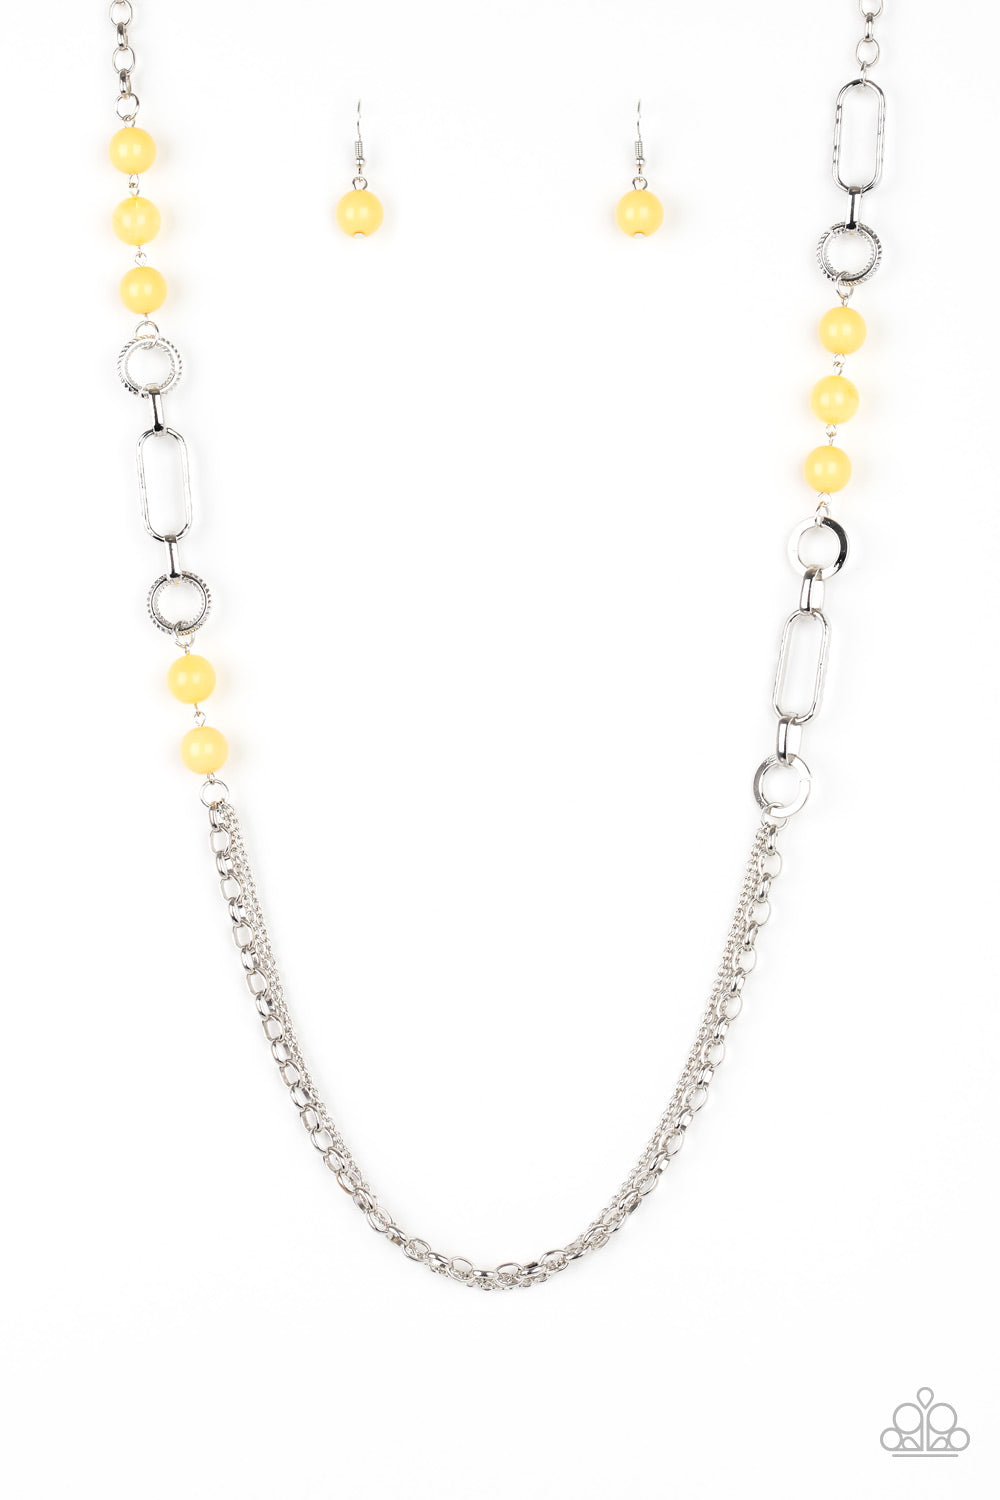 CACHE Me Out - yellow necklace 711